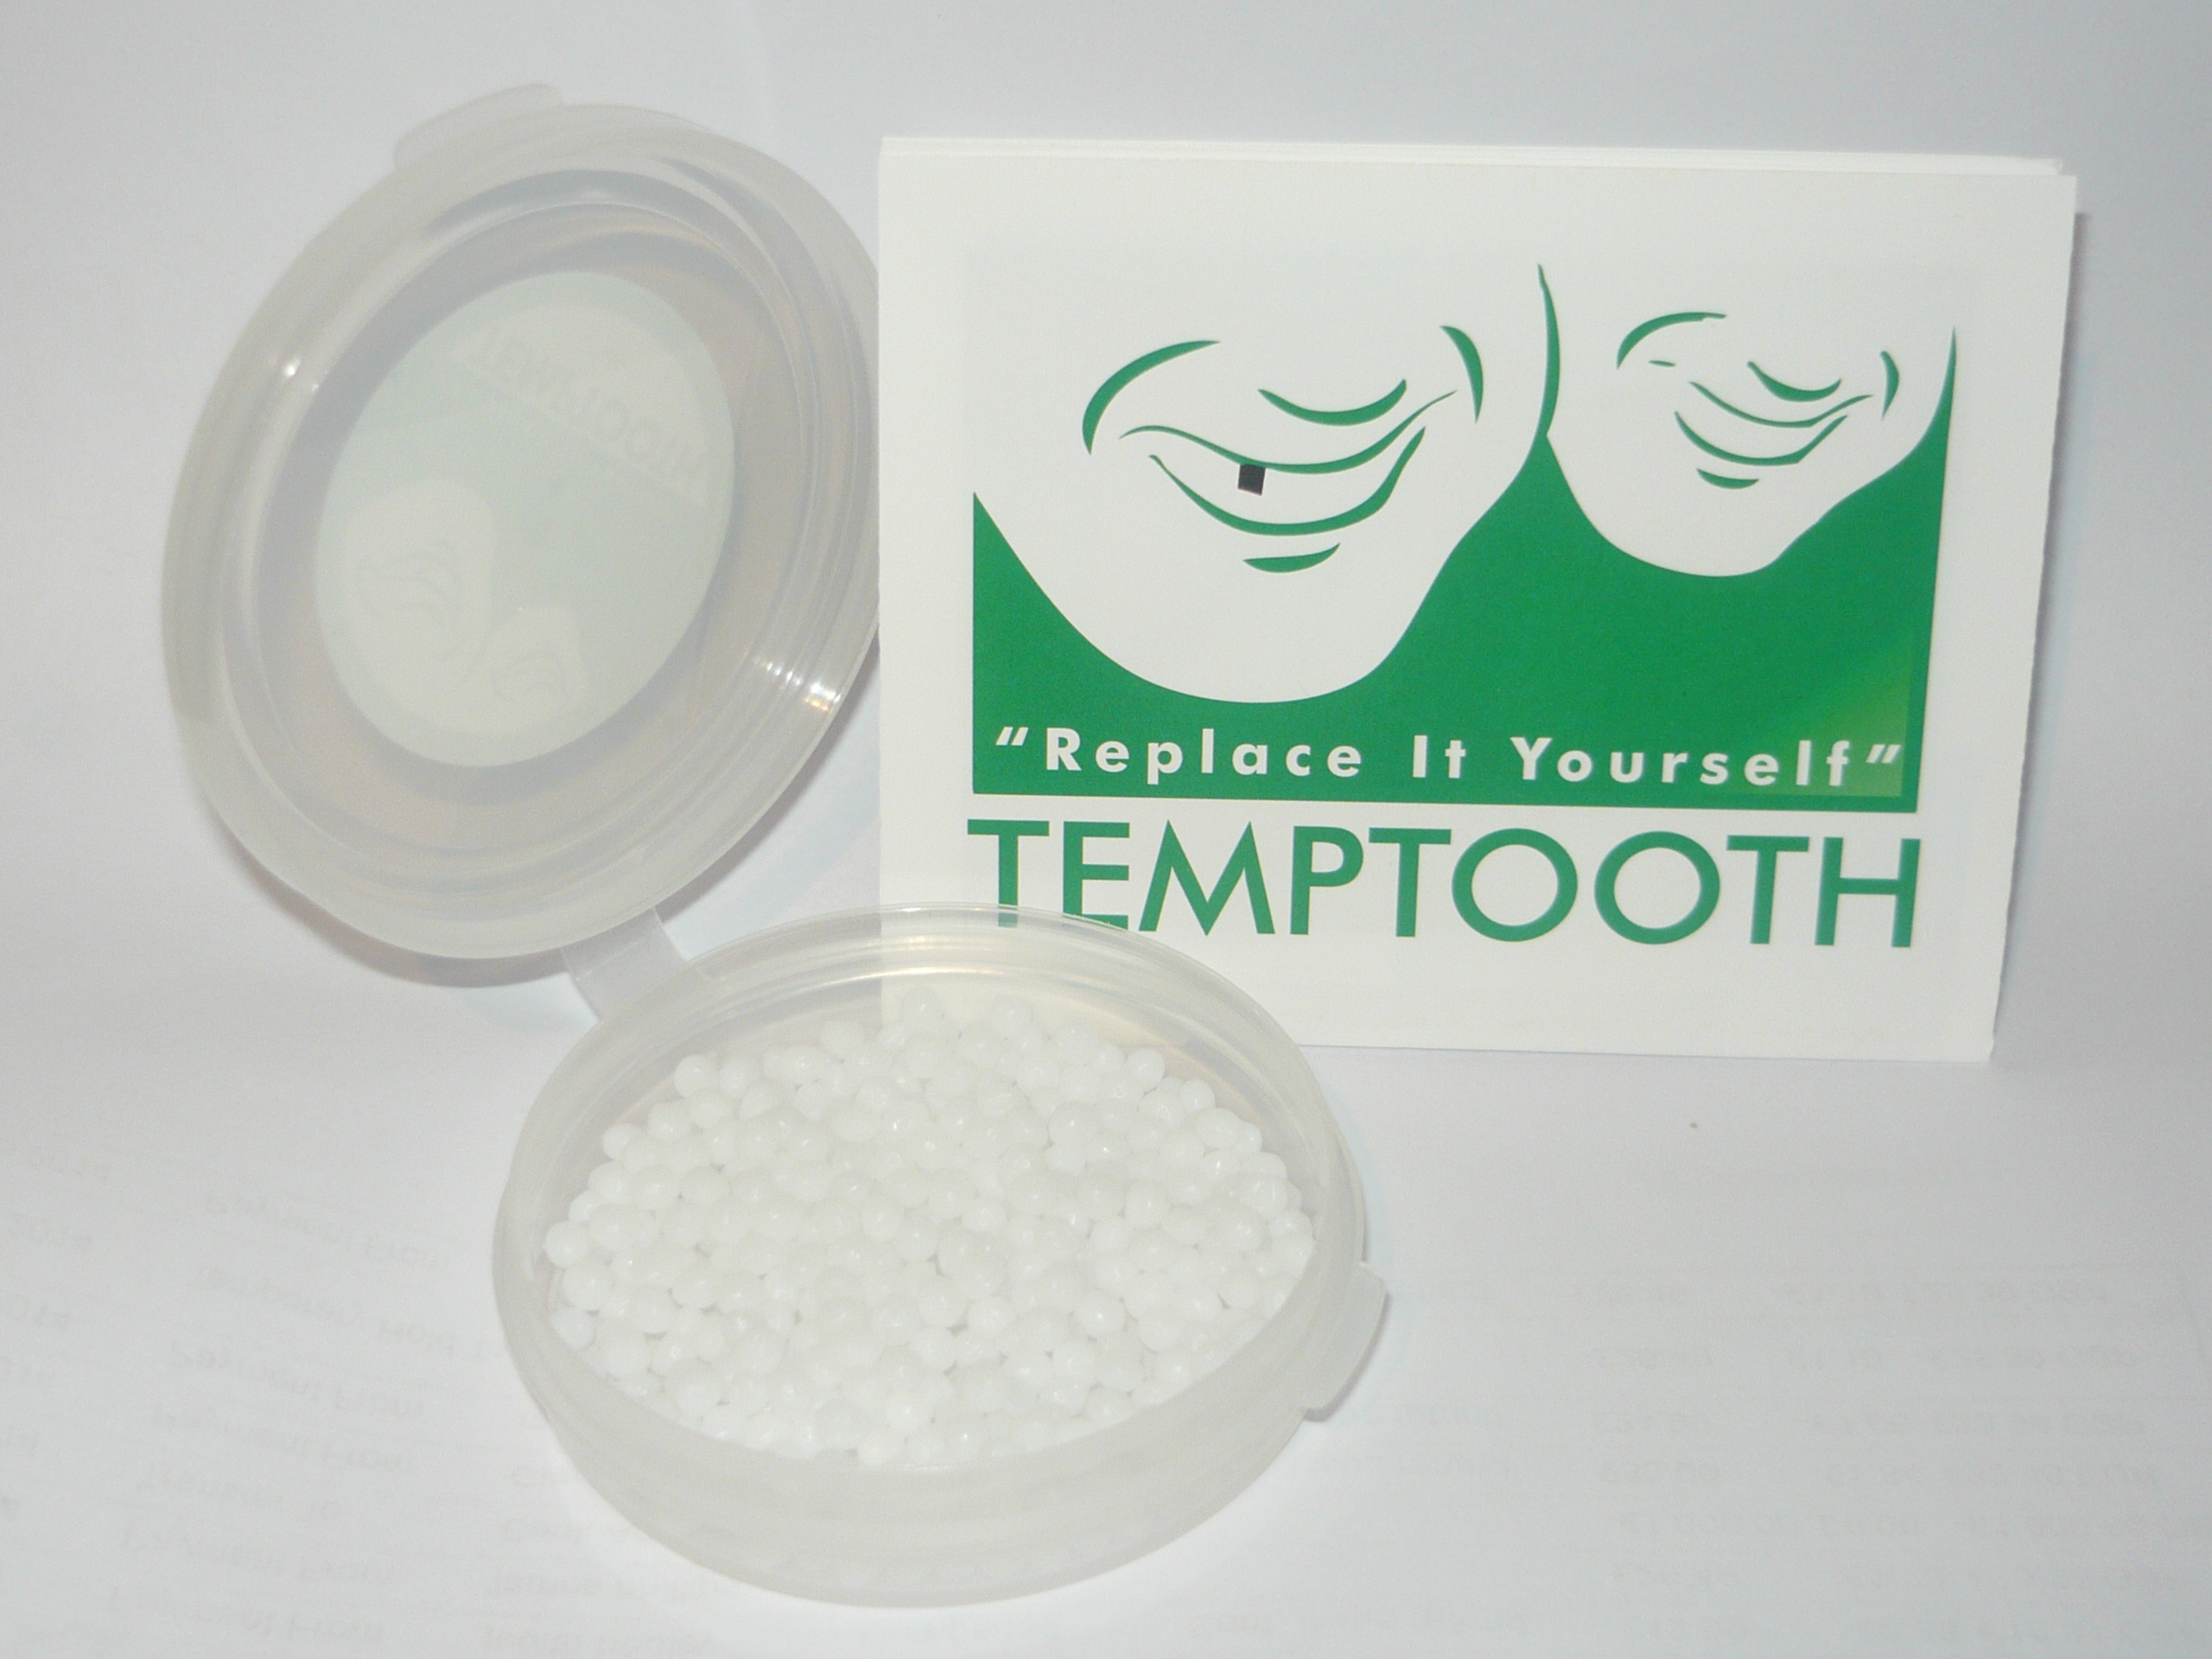 Replace a missing tooth - temporary tooth replacement you make yourself.  Now available in the UK and Europe